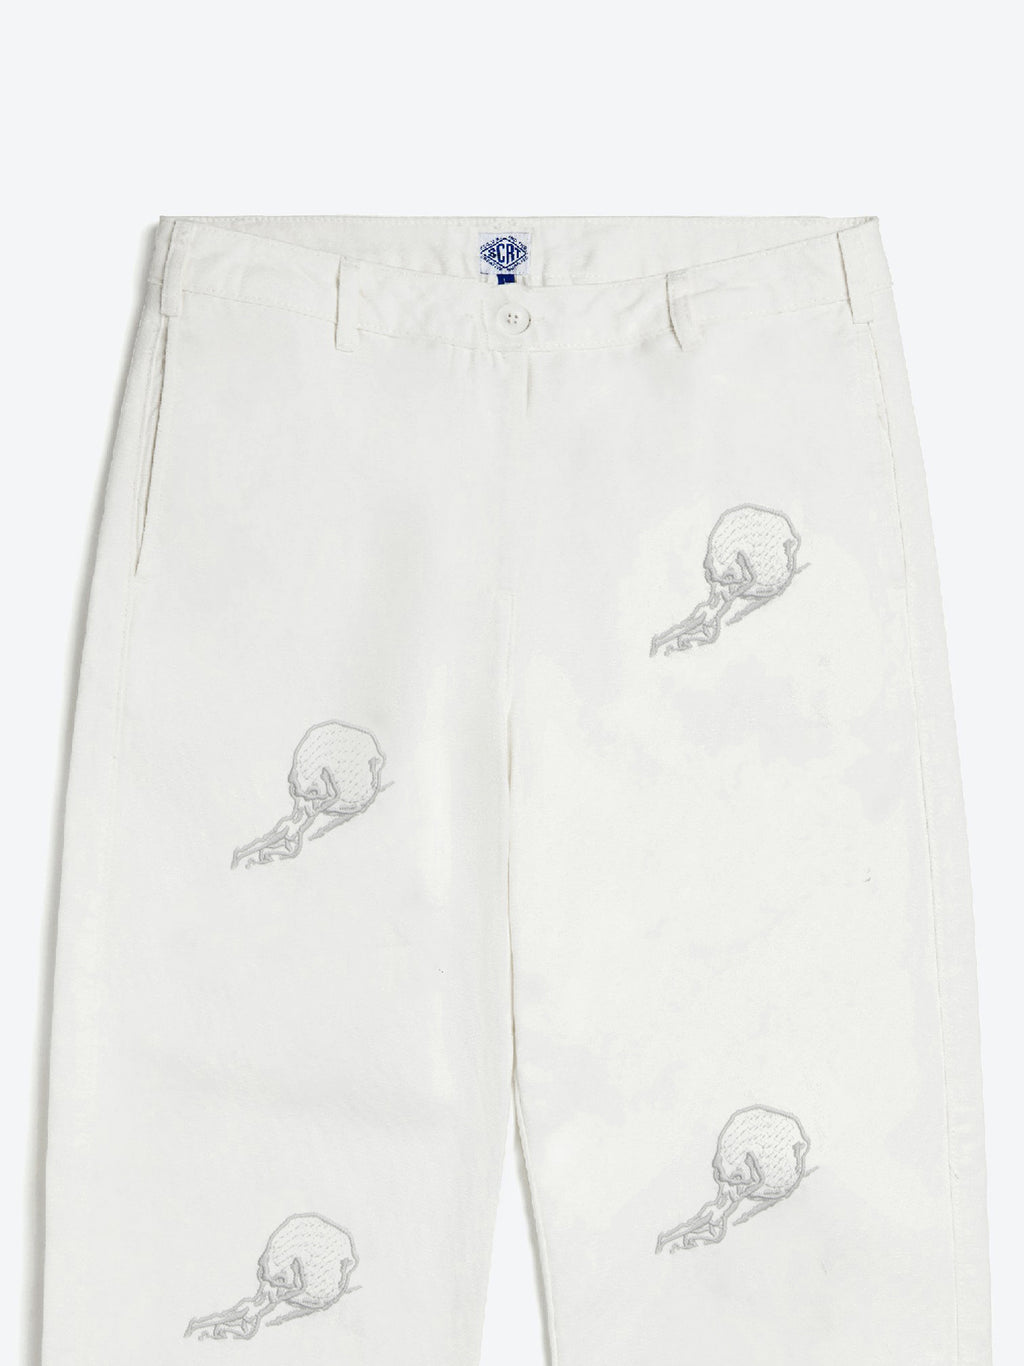 Sisyphus Trousers - Natural